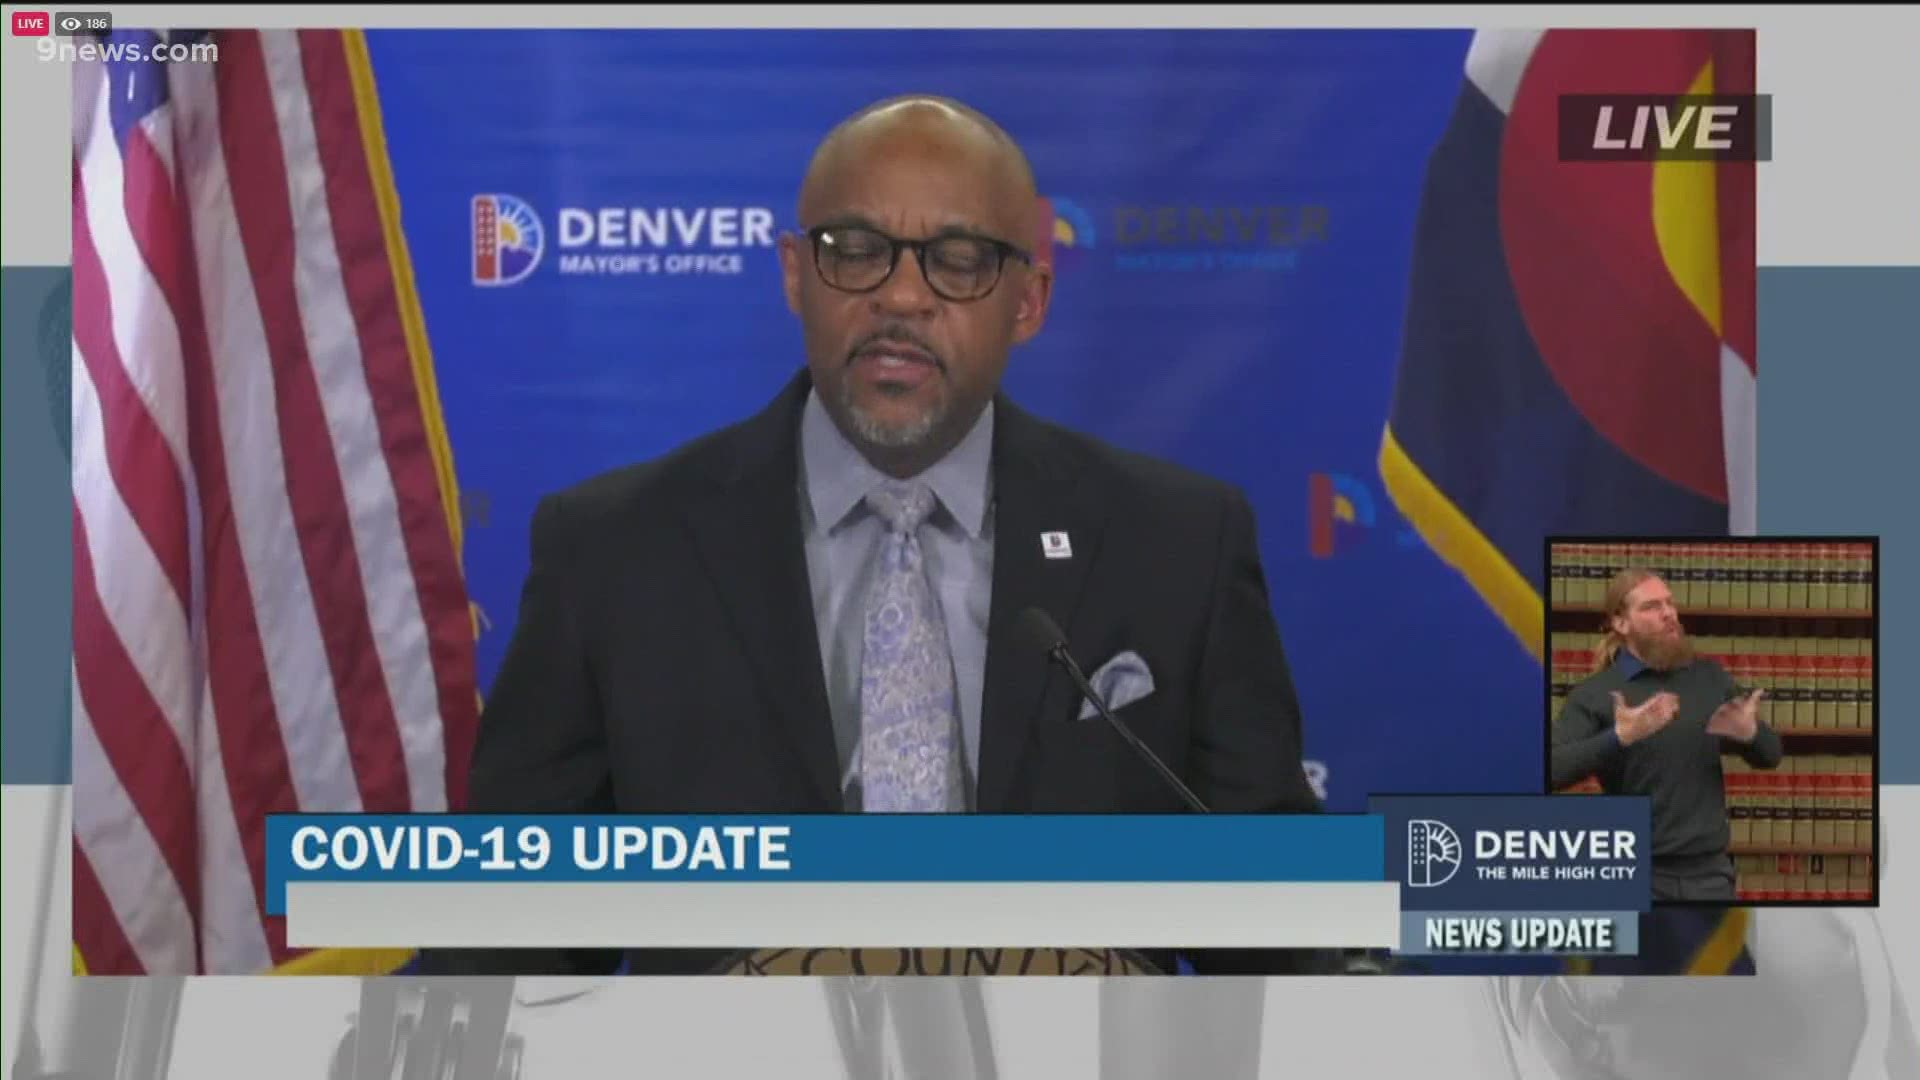 Mayor Hancock detailed the latest on Denver's COVID response and vaccine distribution plans.